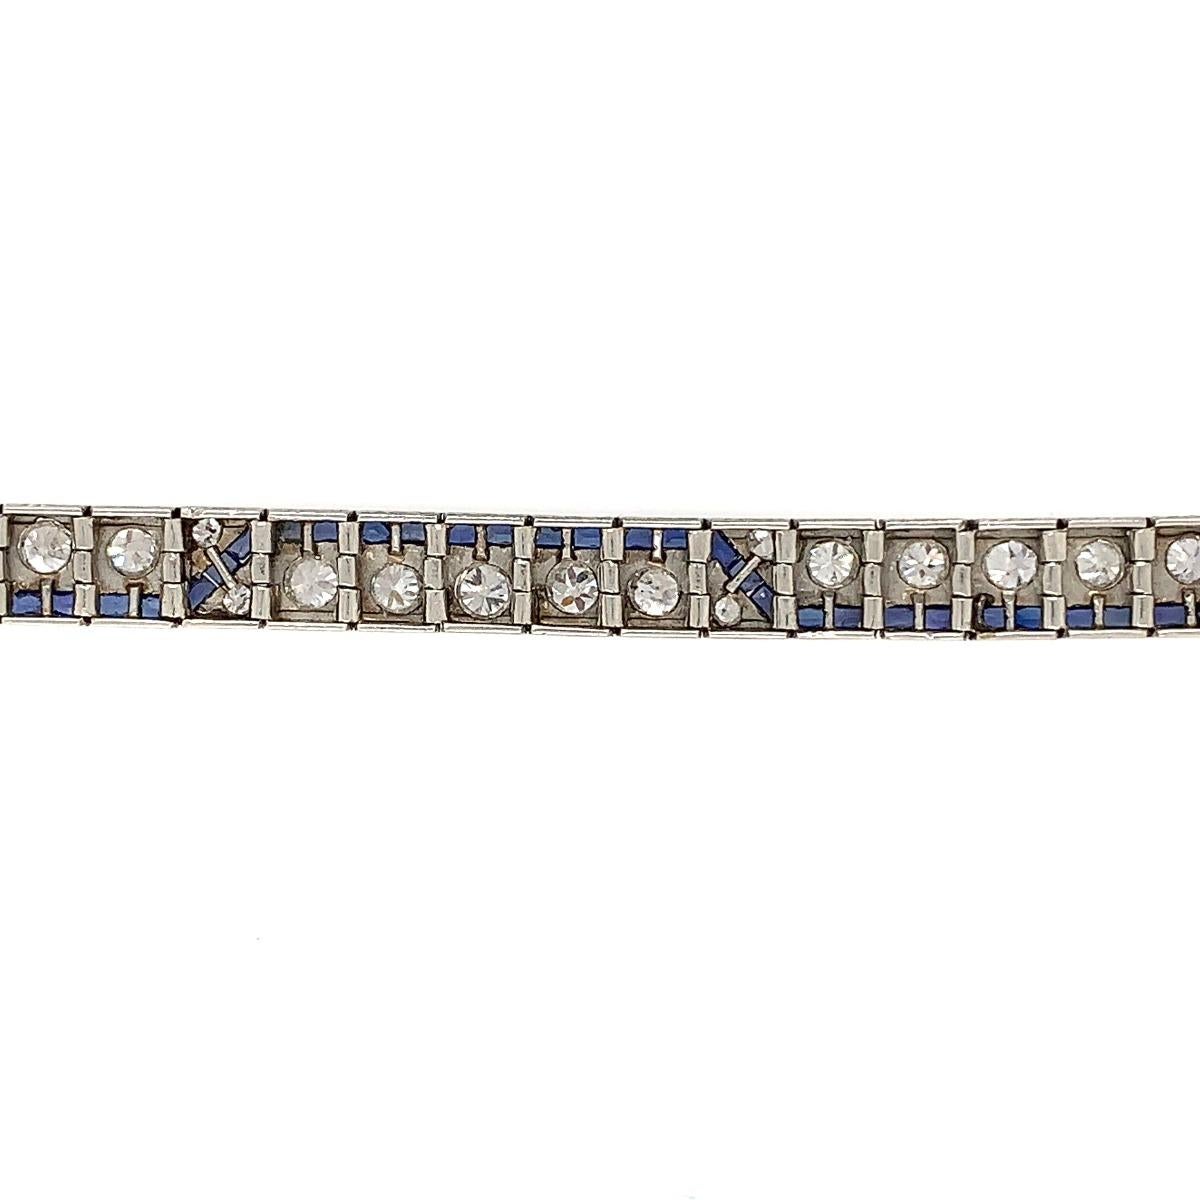 Metal: Platinum
Condition: Excellent
Year Of Manufacture: Circa 1920s
Length: 6.45 inches
Gemstone: Diamond, Synthetic Sapphire
Old European Cut Diamond Weight: 4.5 CT
Color: G-H
Clarity: Vs1-VS2
Total Item Weight:  23 g

SKU#B-01818